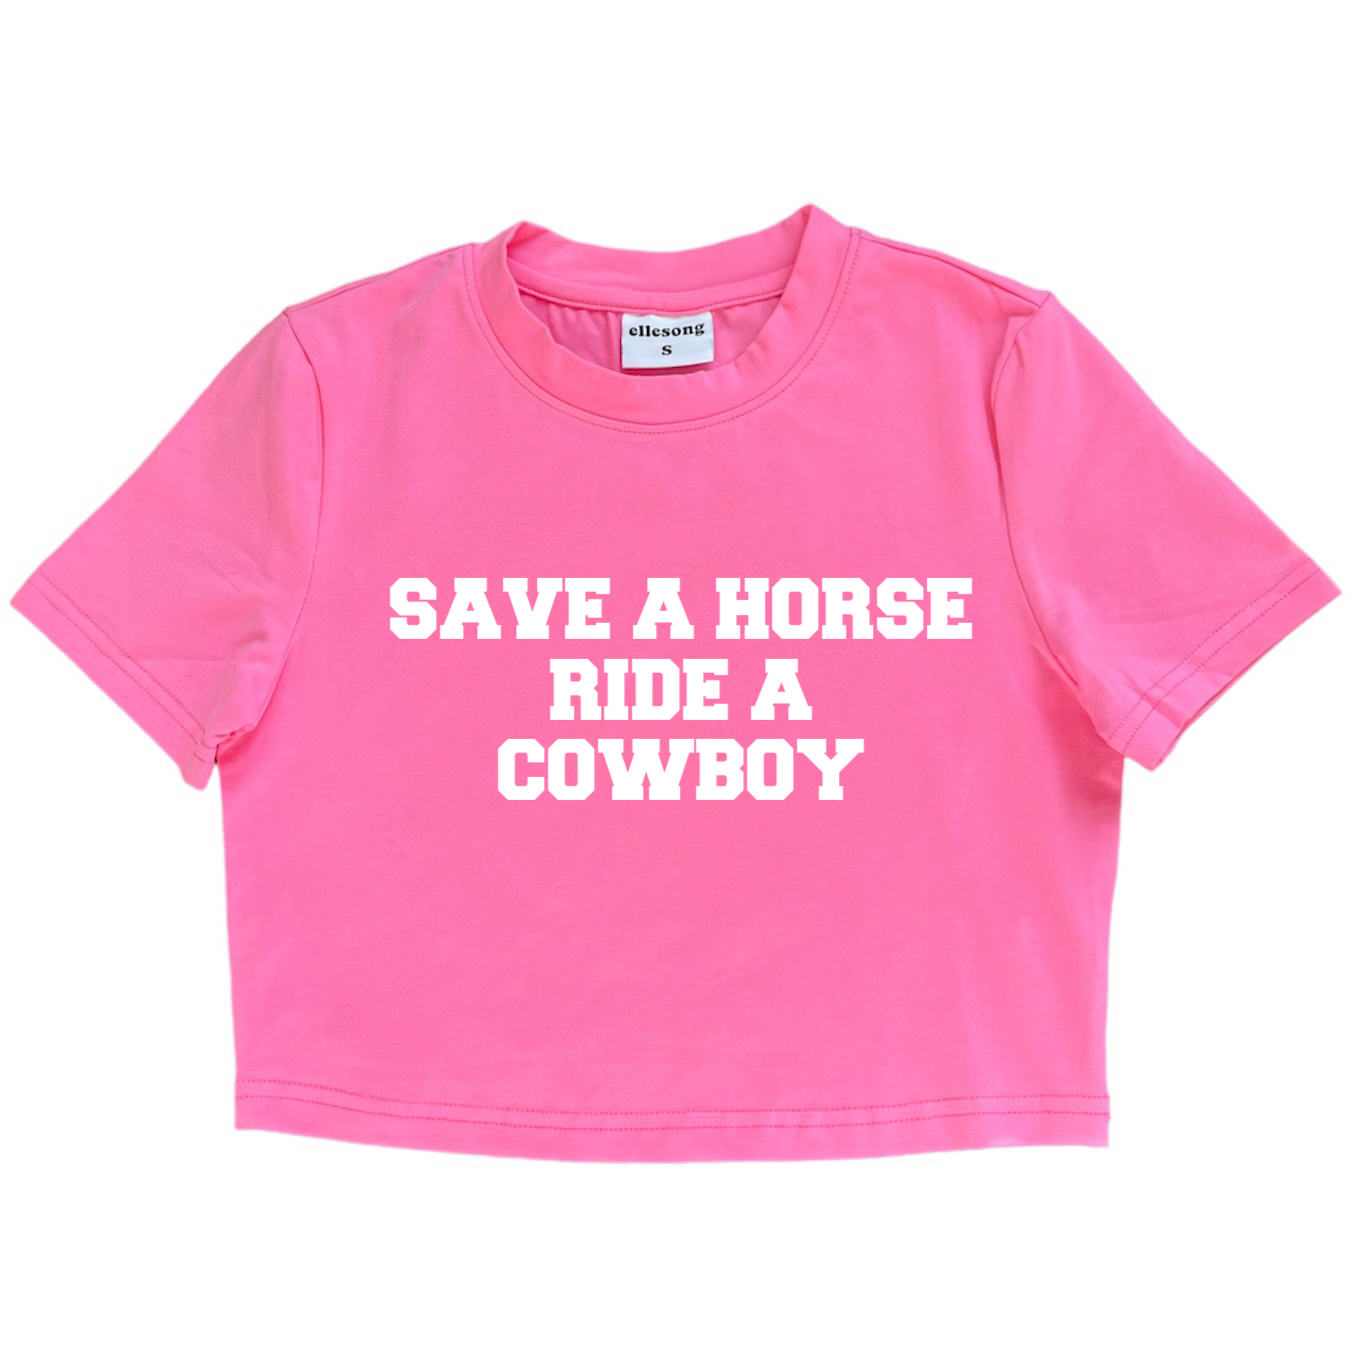 Save A Horse Ride A Cowboy Pink Baby Tee